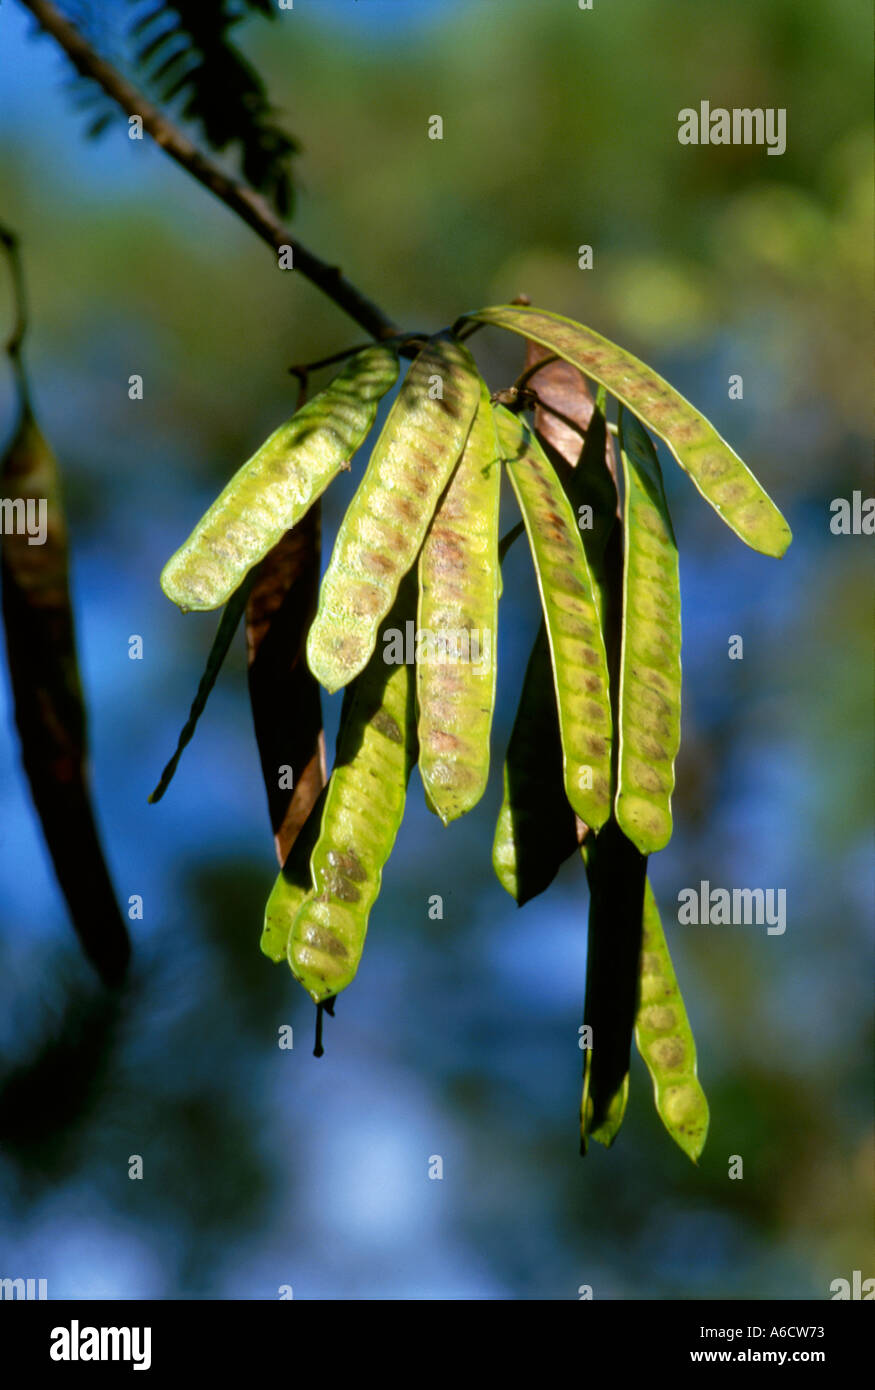 singer tree womans tounge Mimosa lebbeck seed pods Stock Photo